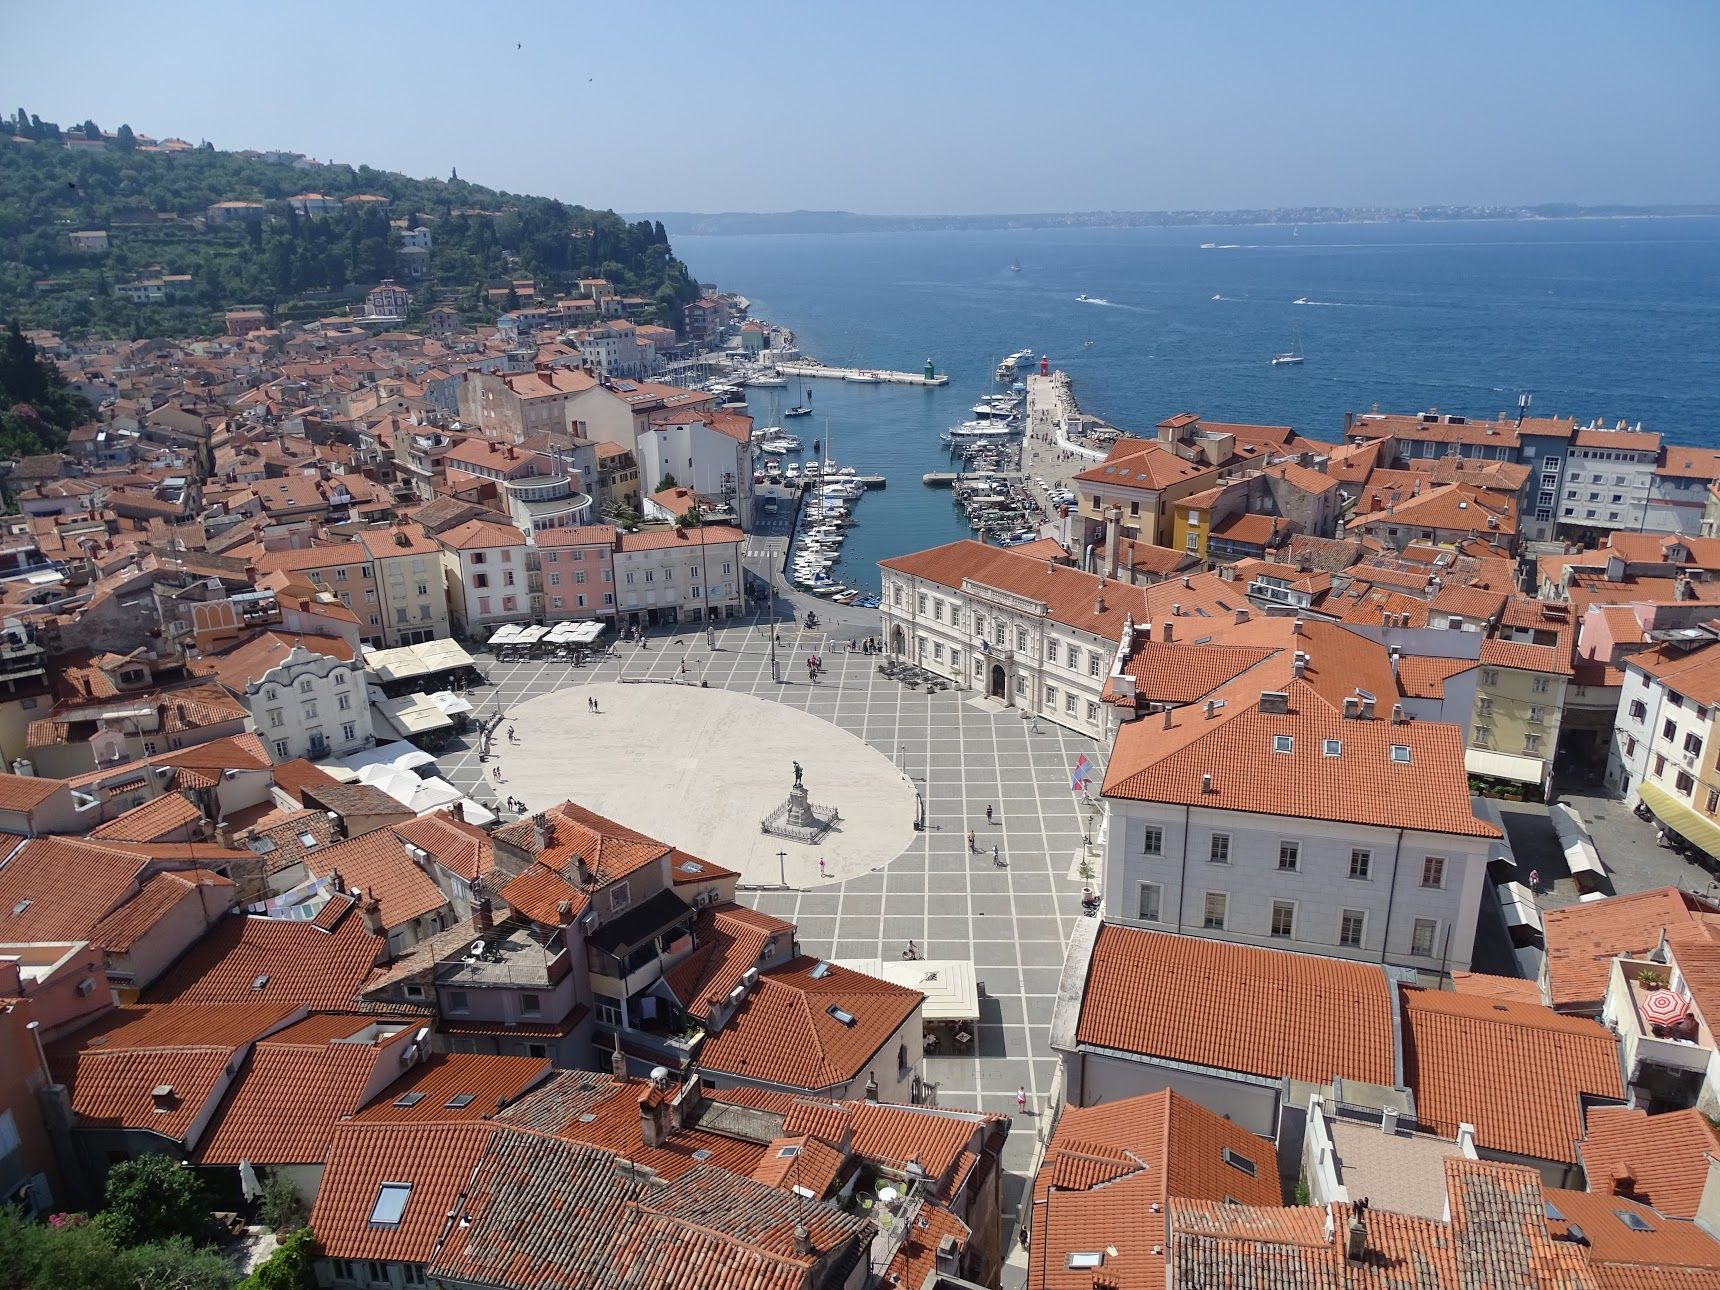 Slovenia only has 29 miles of coastline. Pictured is the coast of Piran. The official borders between Slovenia and Croatia have not yet been decided so the Slovenes are fighting for more coast. Image by Olivia Watson. Slovenia, 2018.